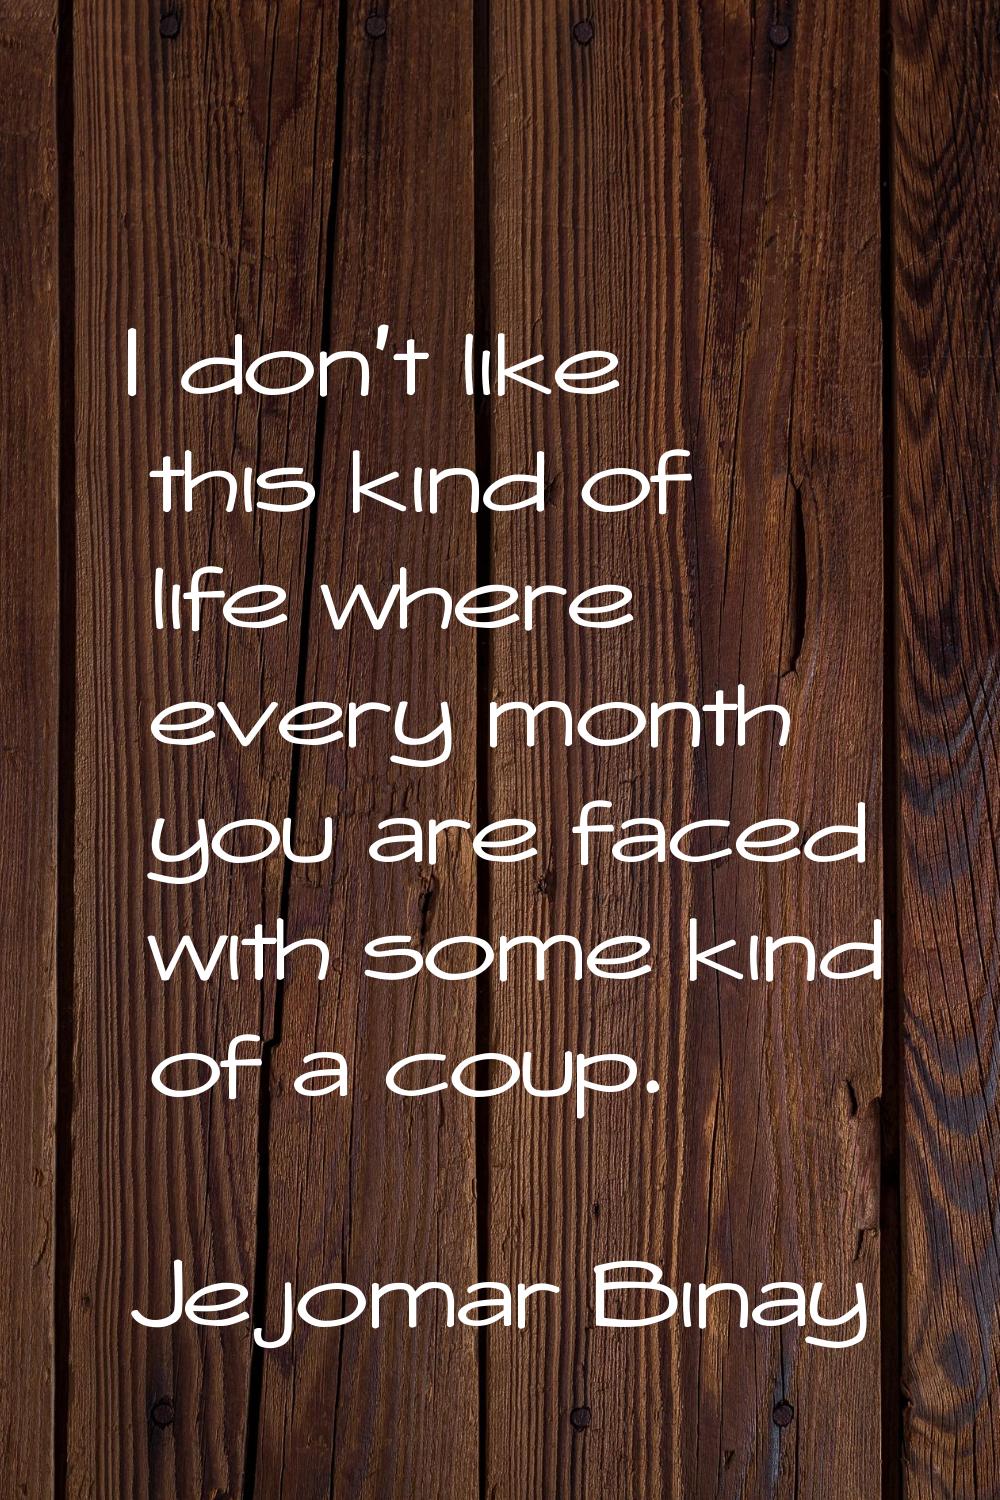 I don't like this kind of life where every month you are faced with some kind of a coup.